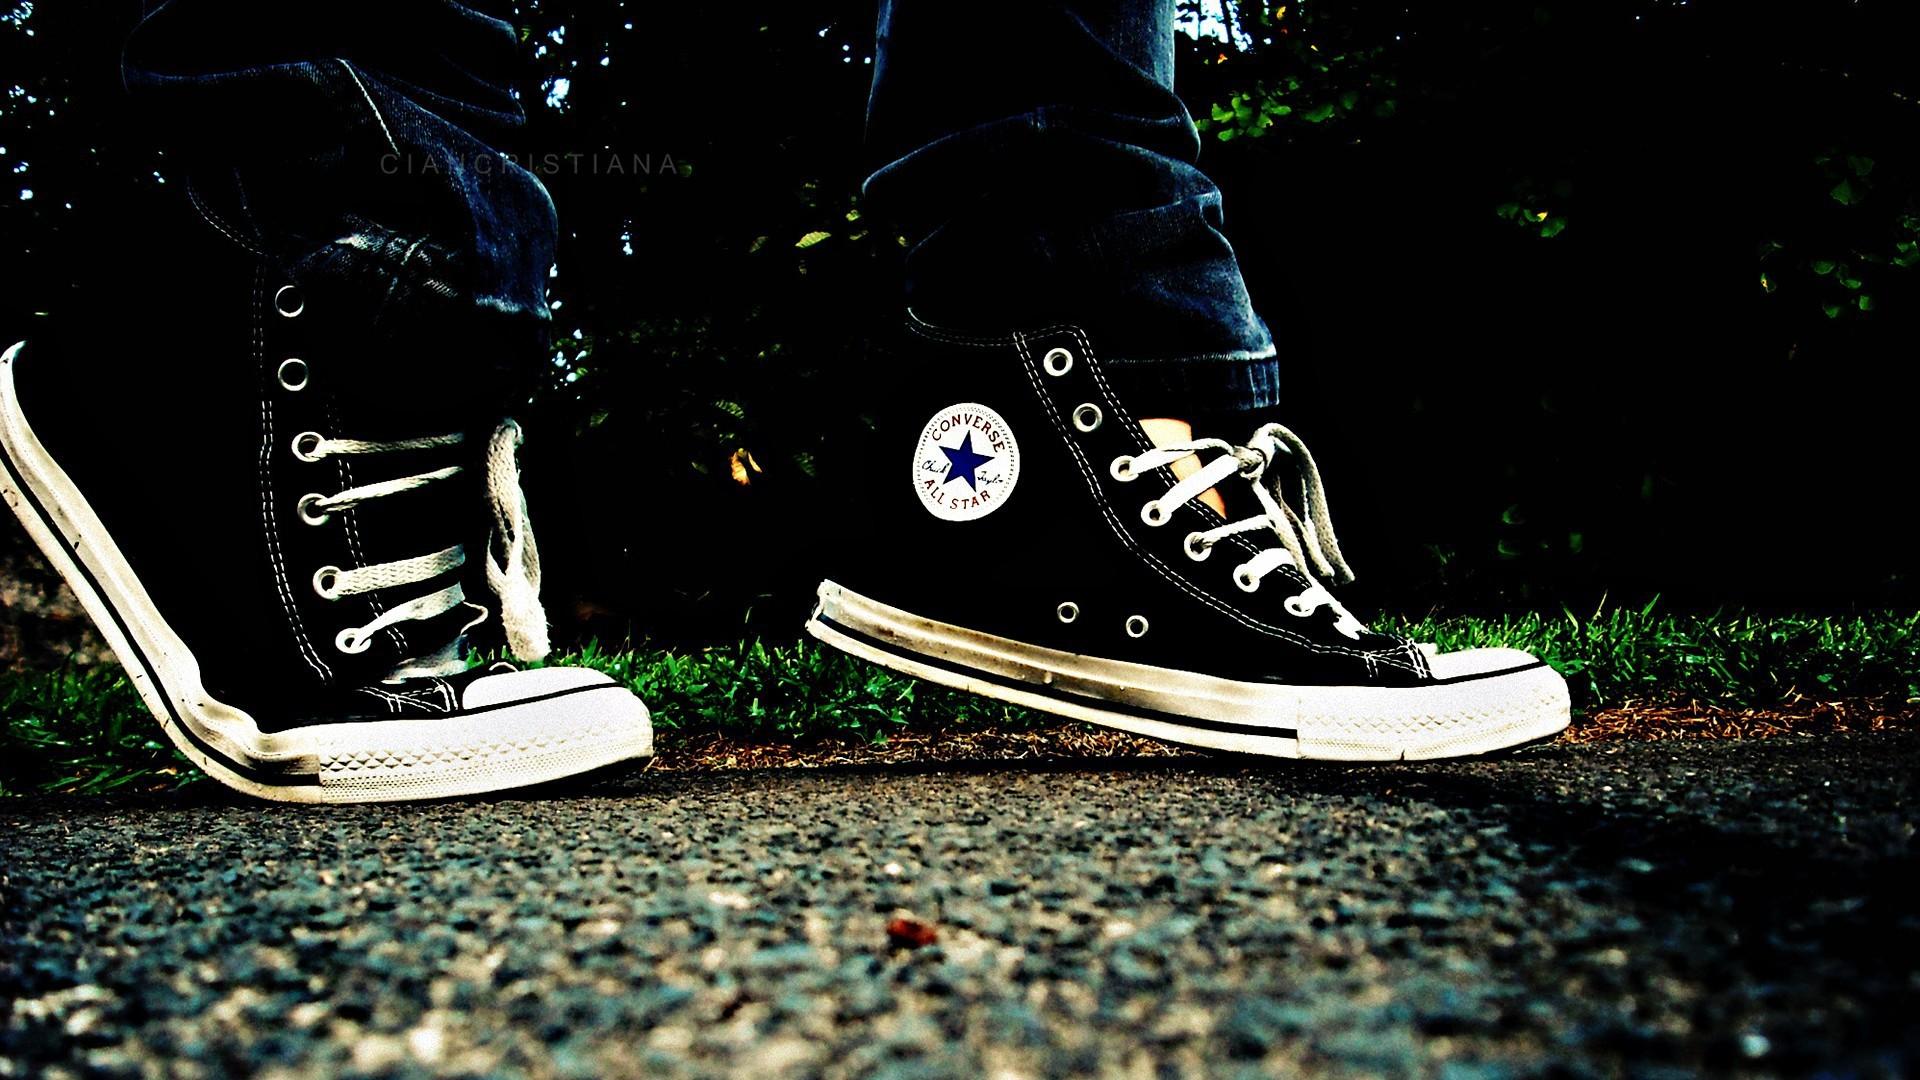 Walk in Converse sneakers wallpaper and image